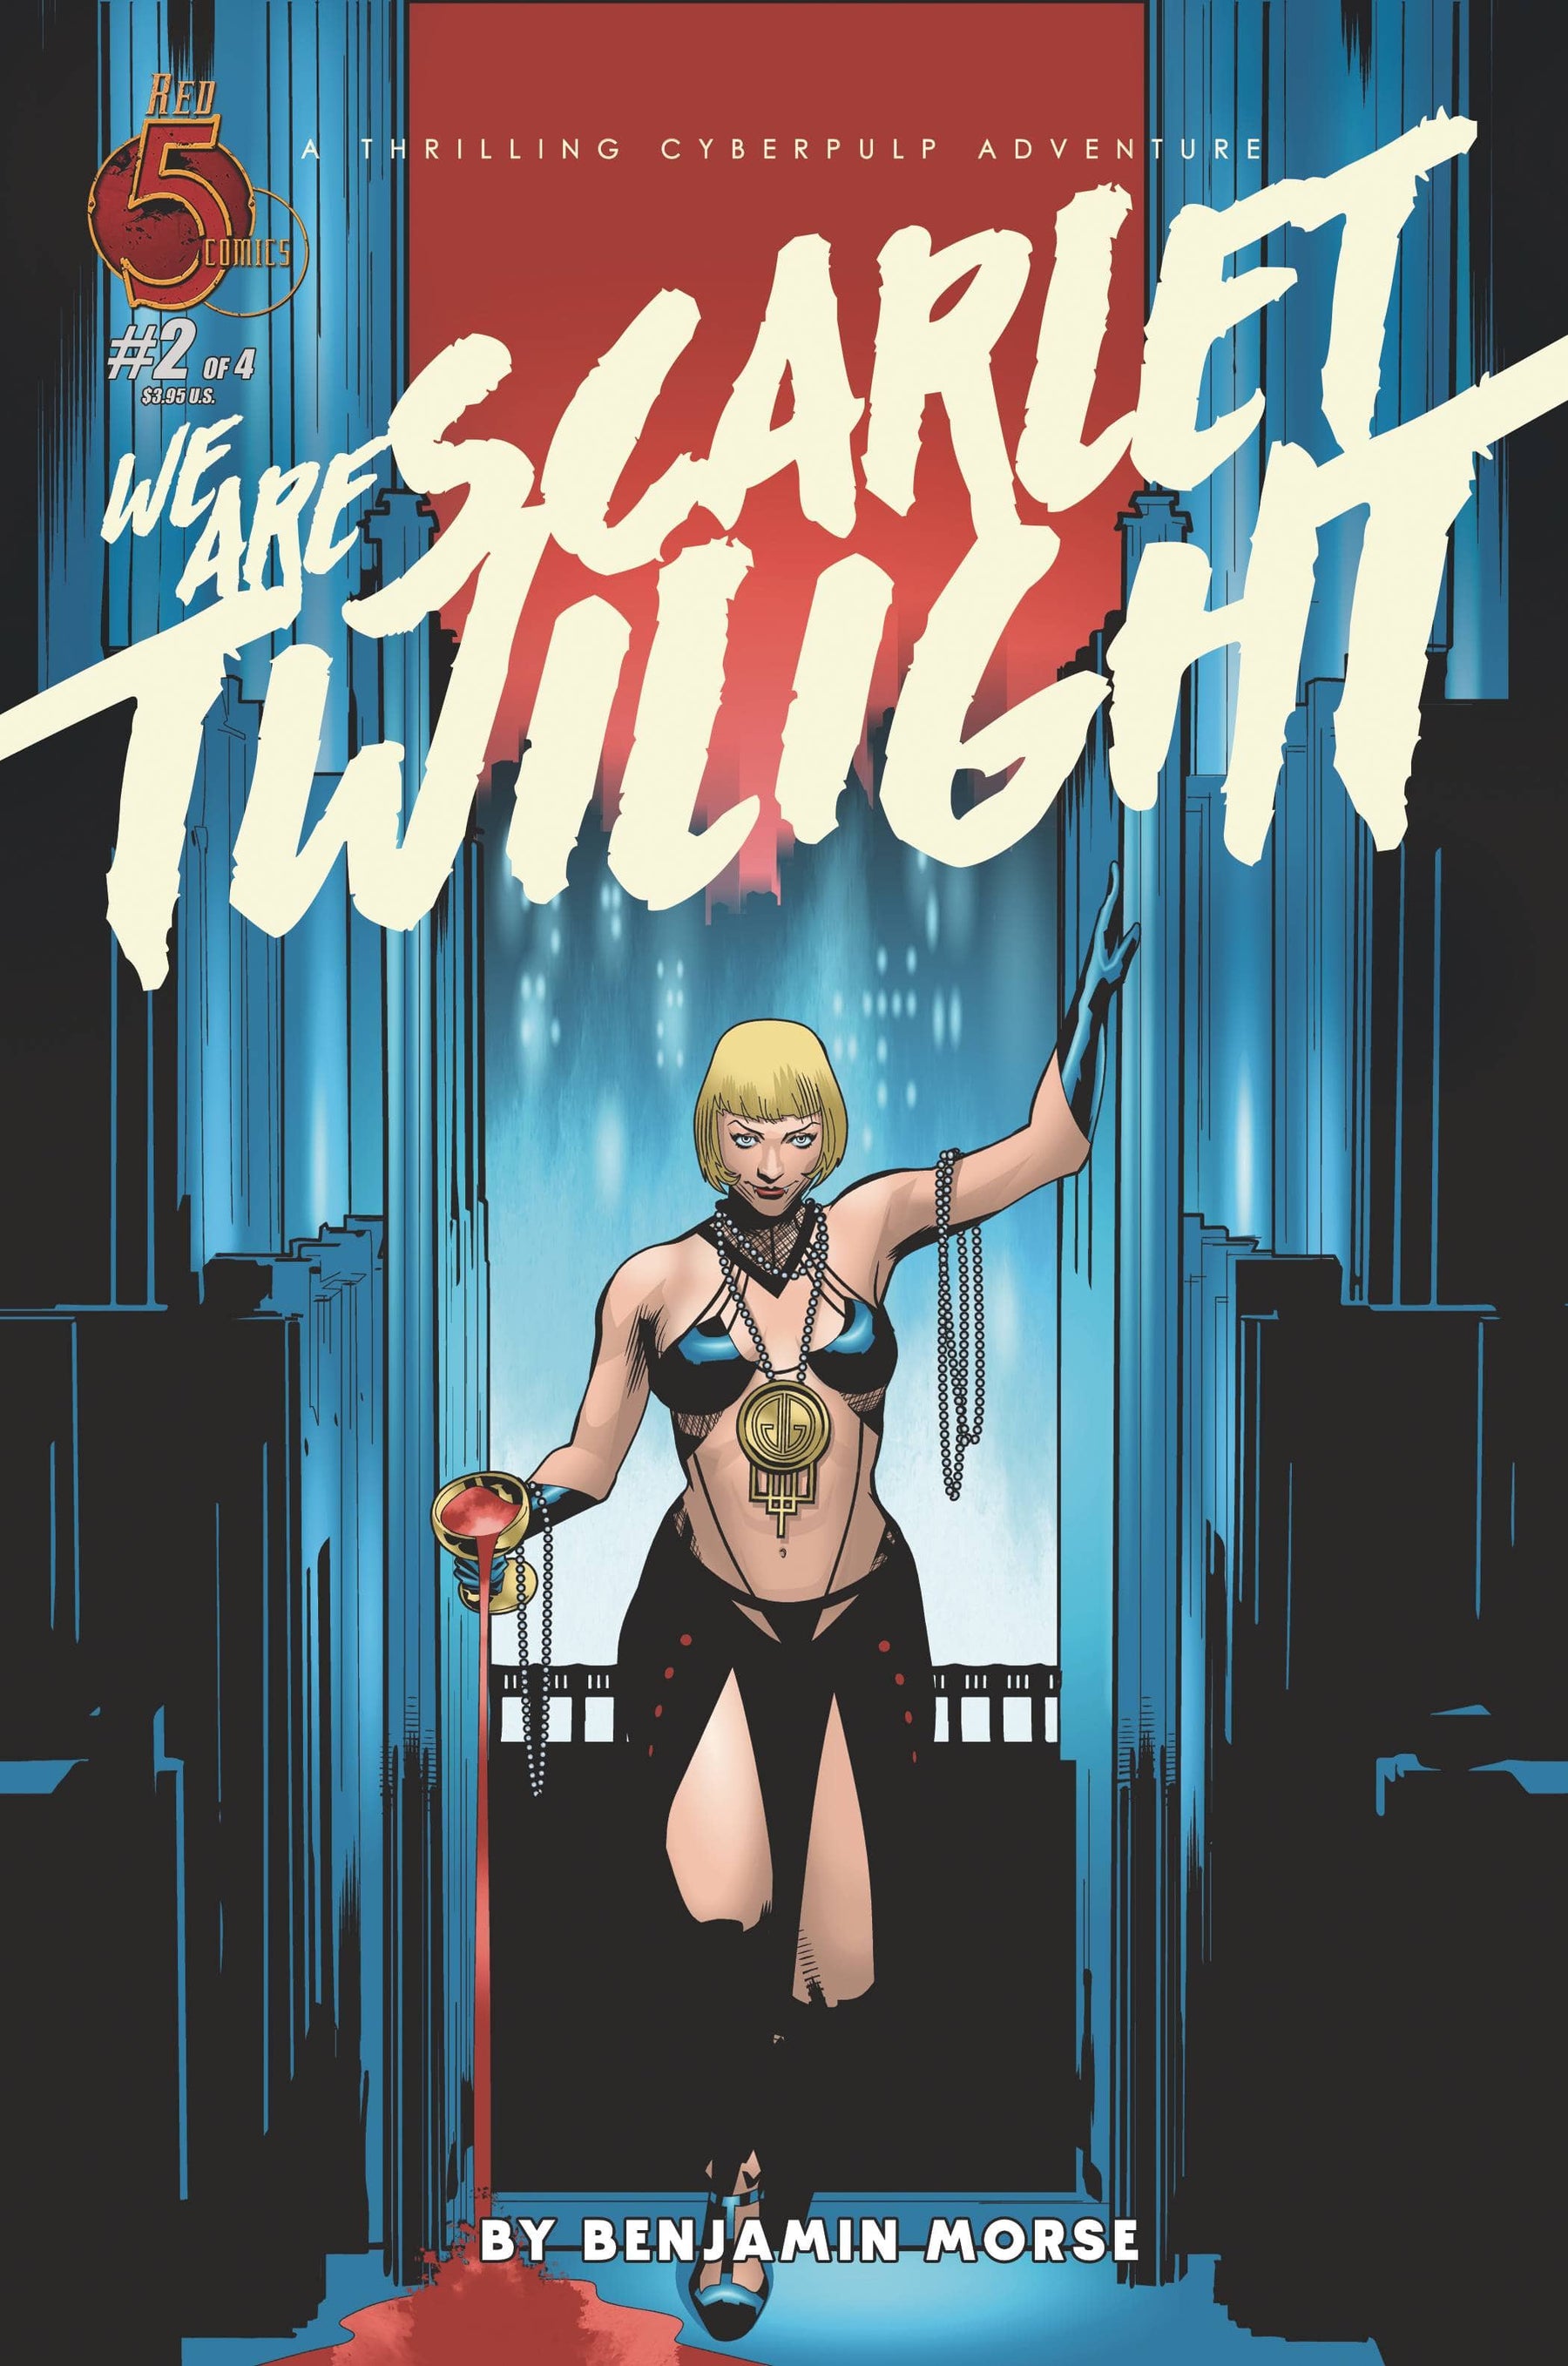 WE ARE SCARLET TWILIGHT #2